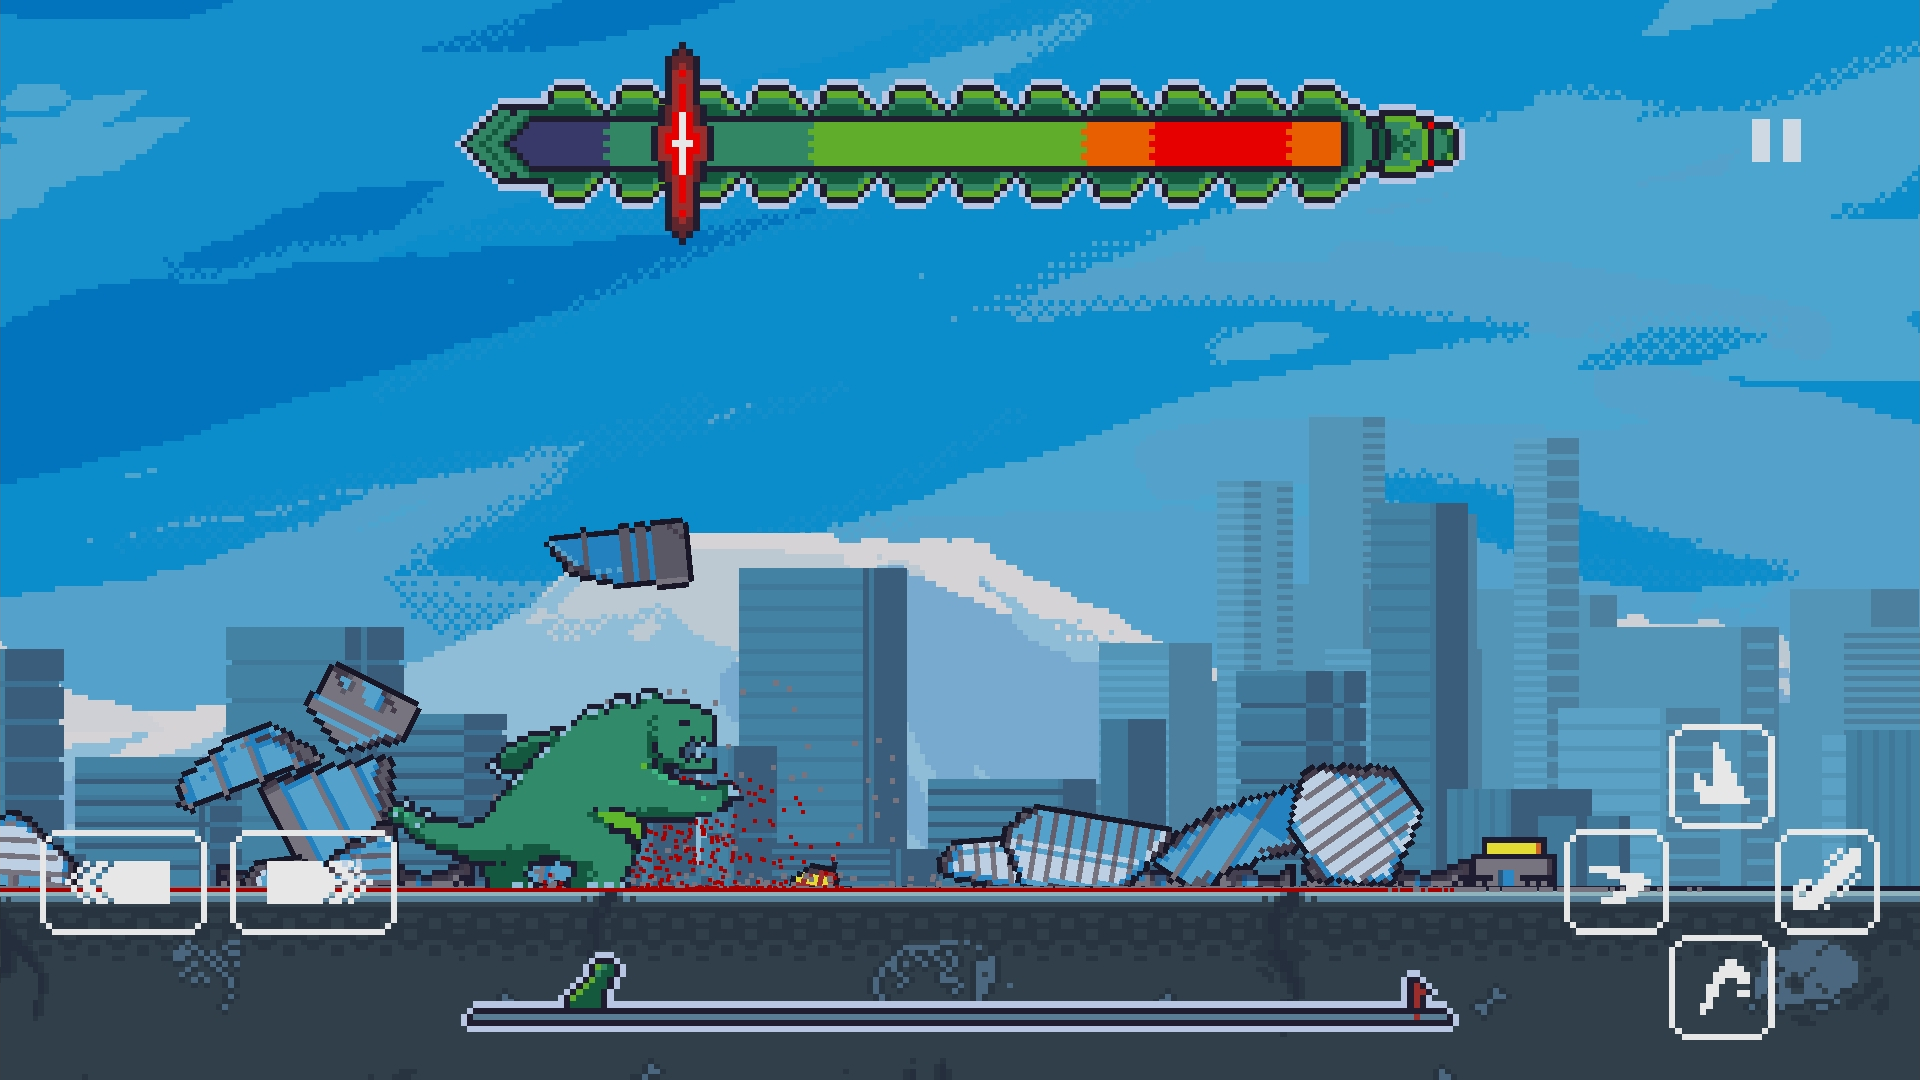 Gameplay of the Laser Lizard for Android phone or tablet.